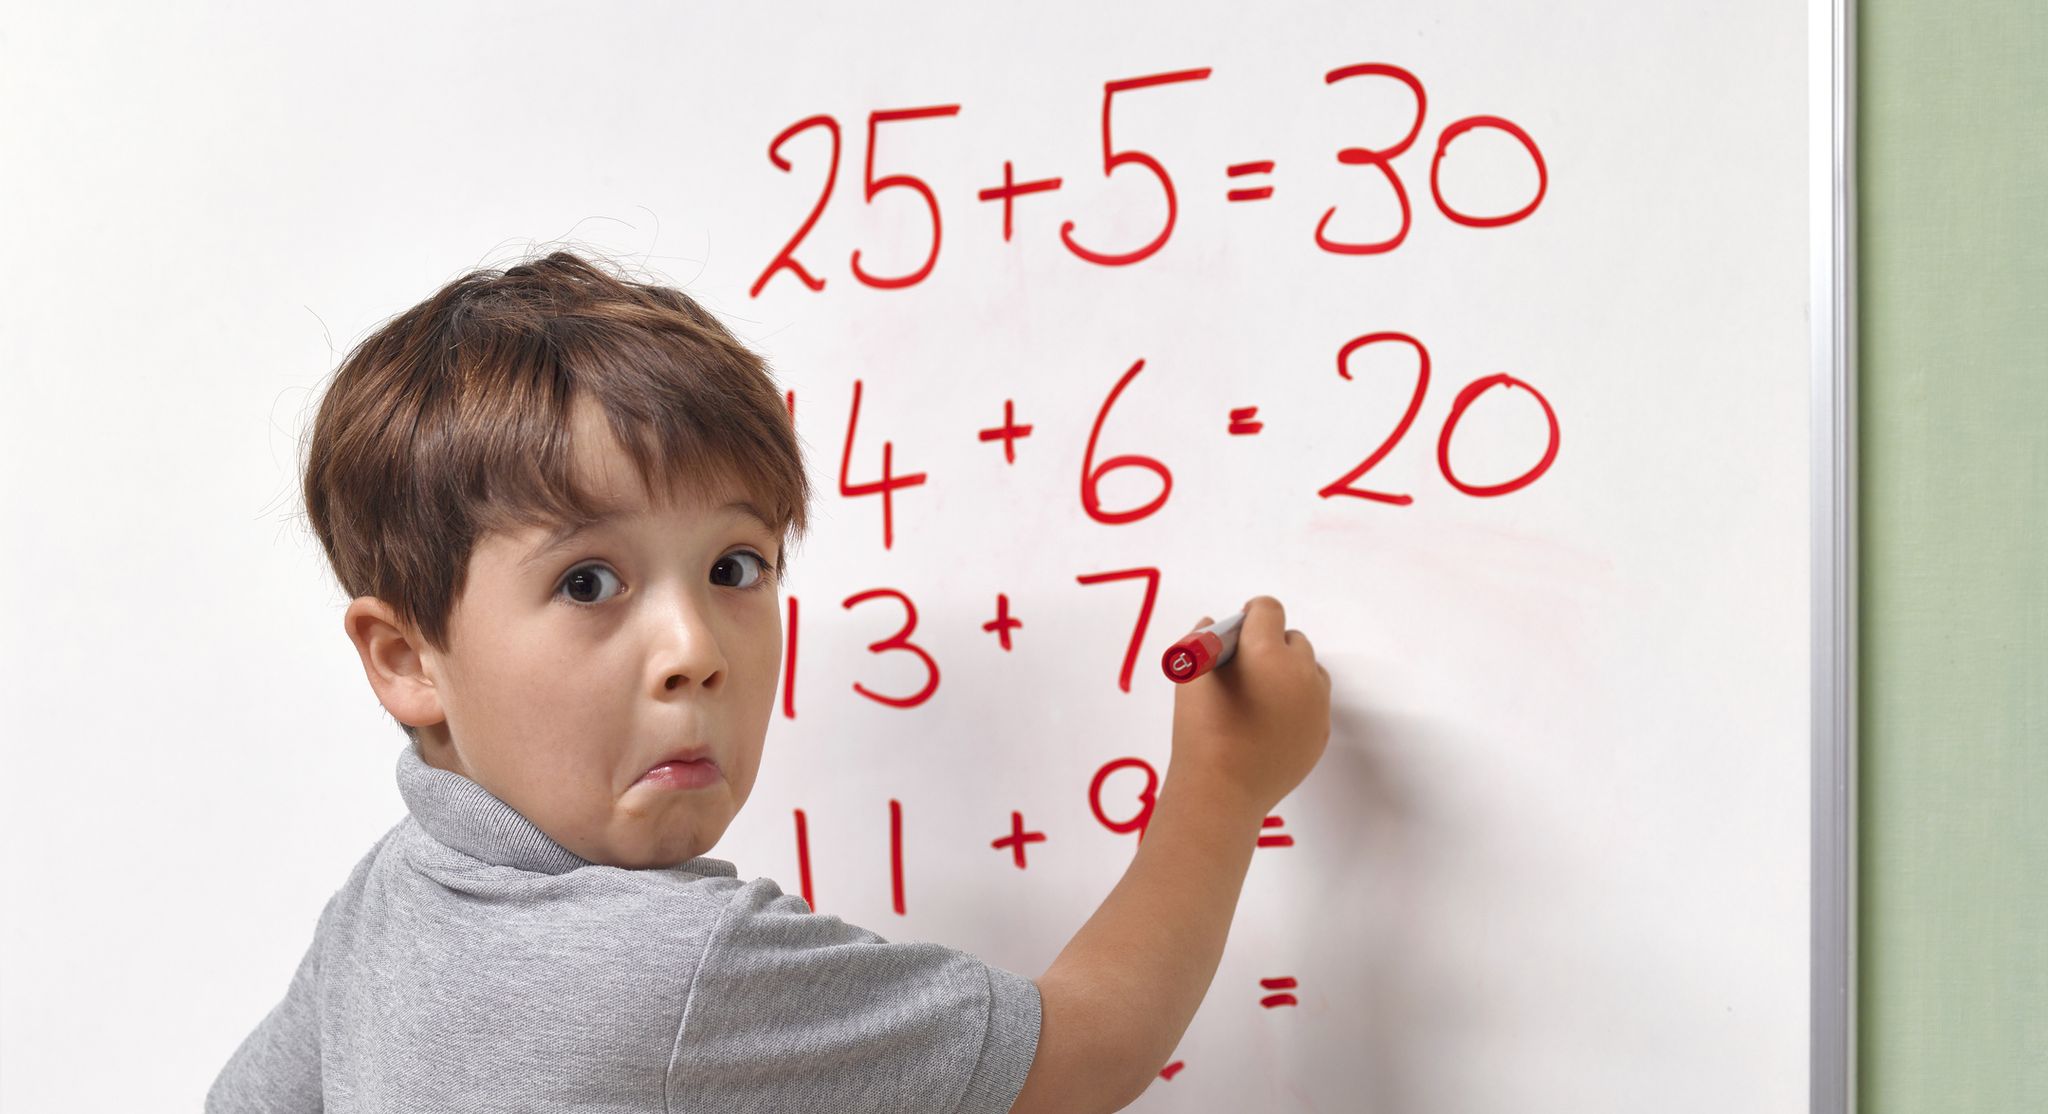 pupil baffled by maths sum on classroom whiteboard